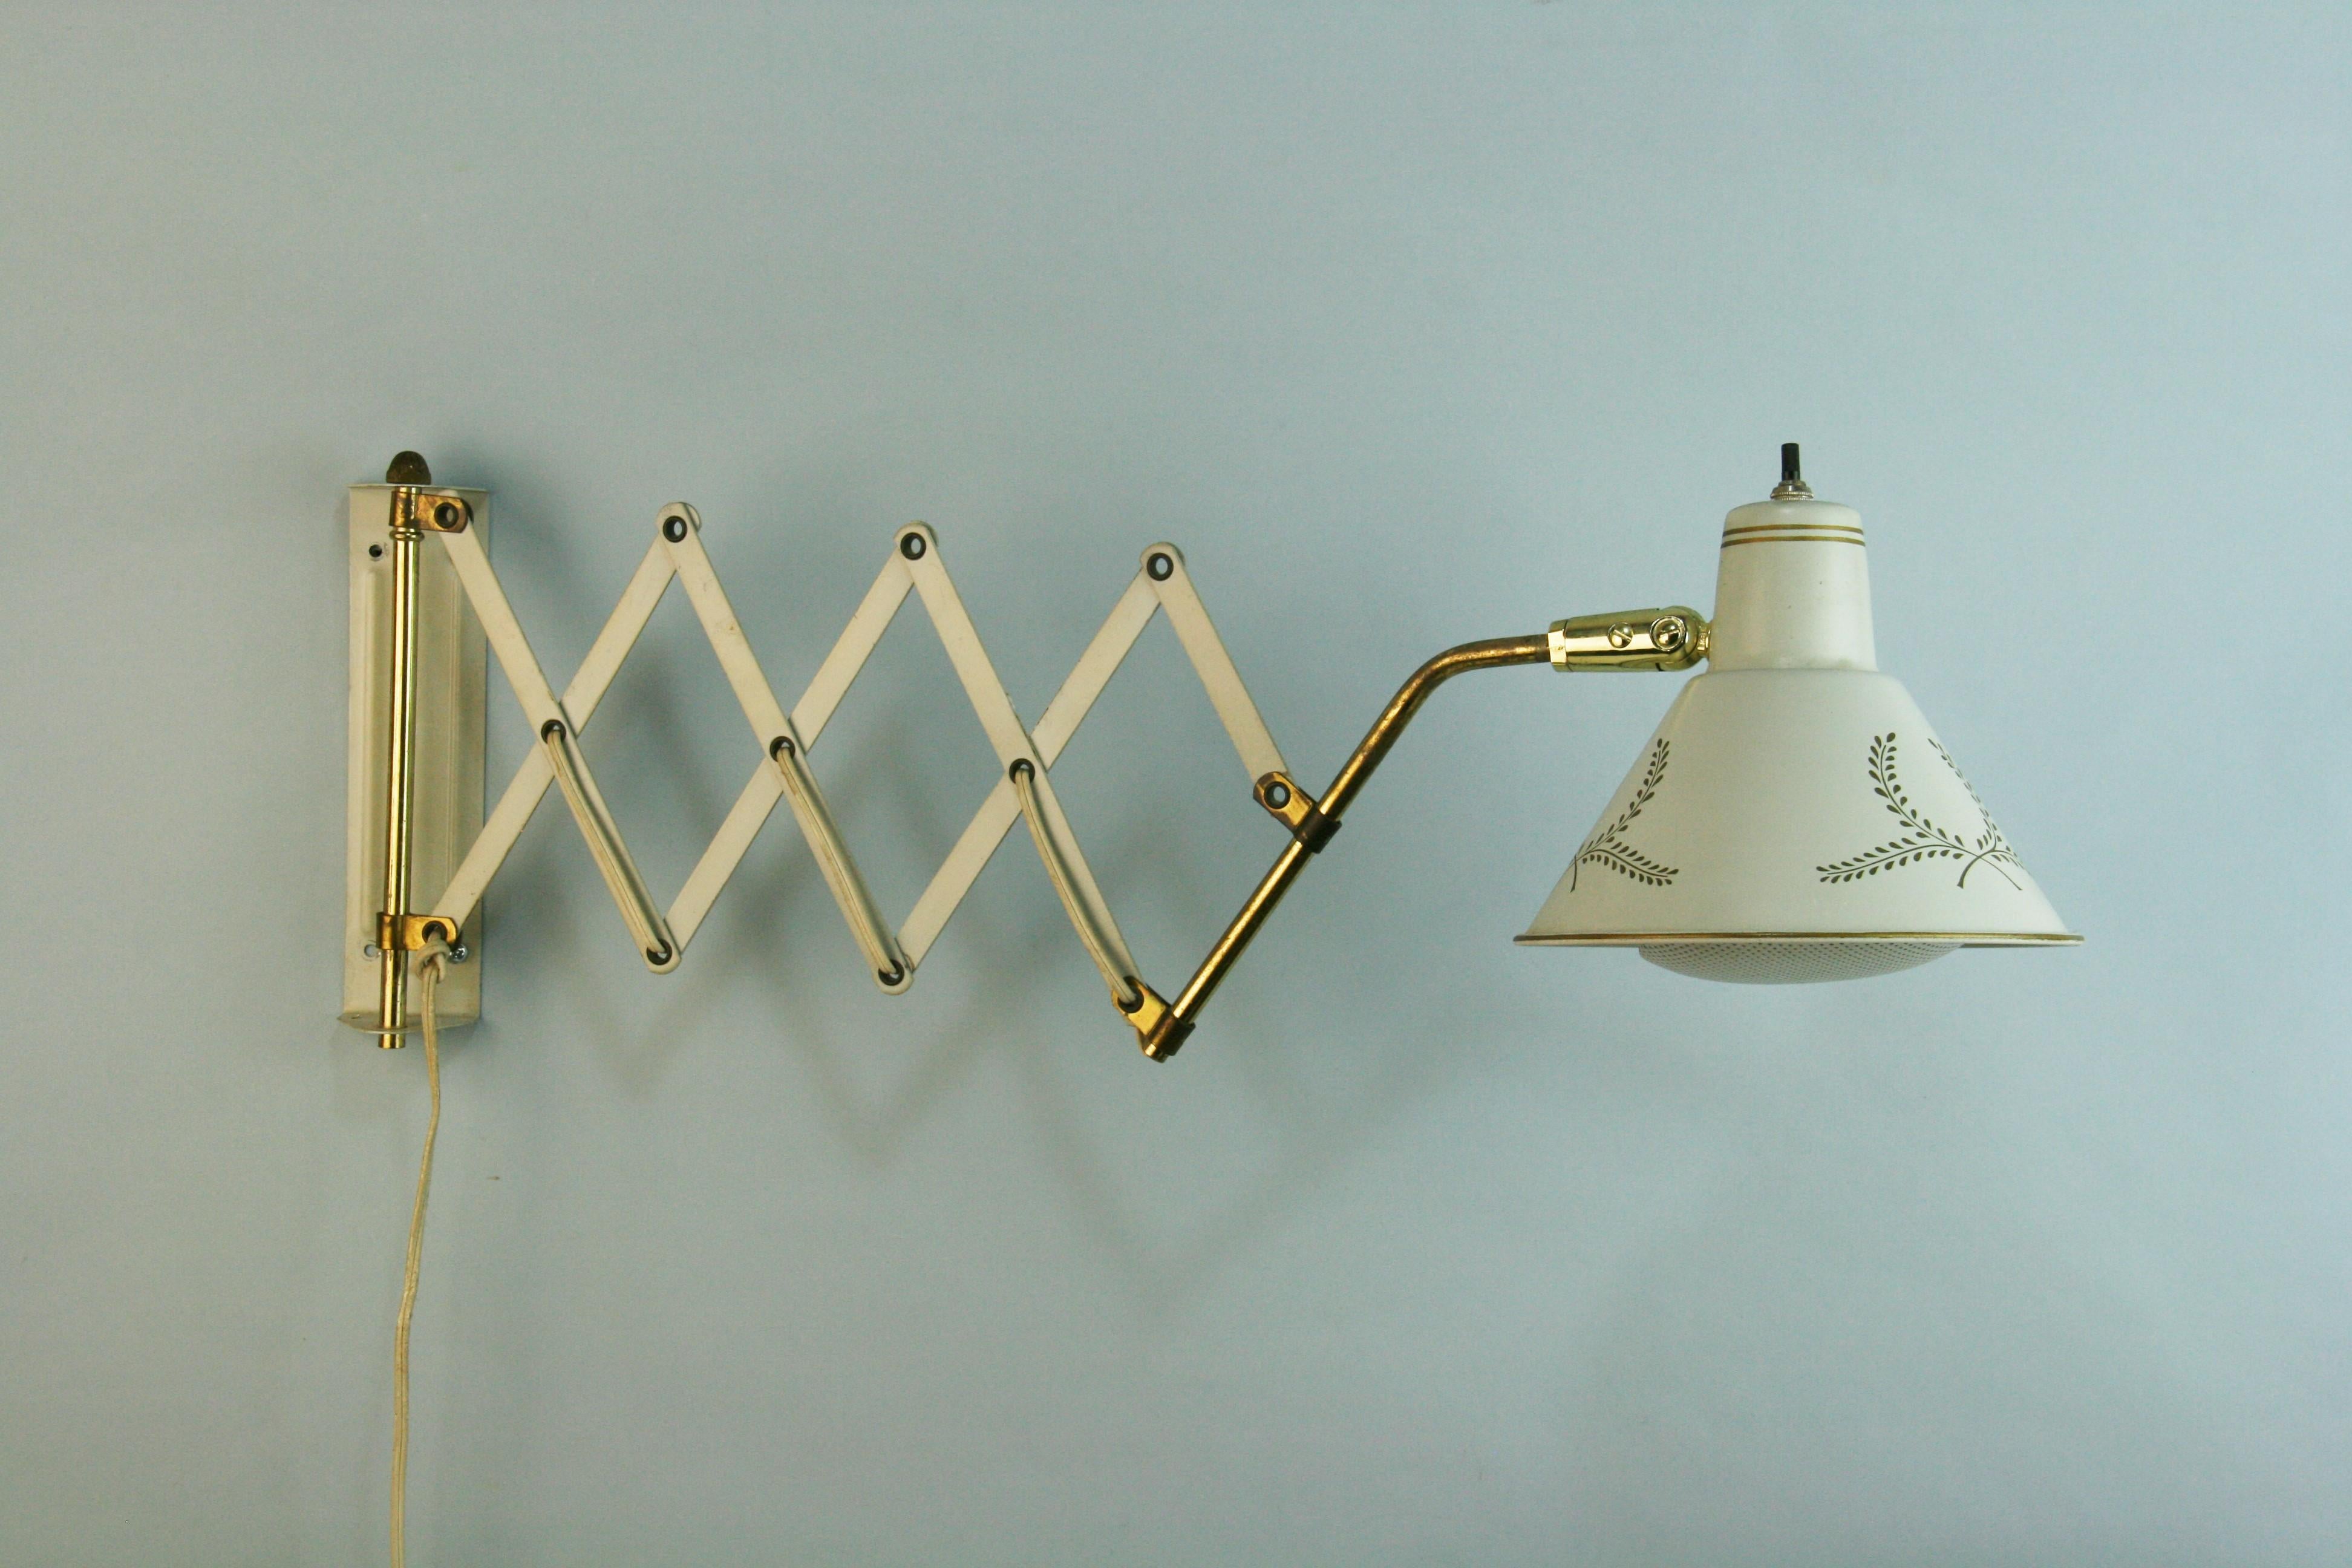 3-942  Mid Century scissor wall lamps
Metal is light French gray color
Has clip on light diffuser
On of switch on bulb holder
Takes one 60 watt Edison bulb
Original wiring in good working condition.